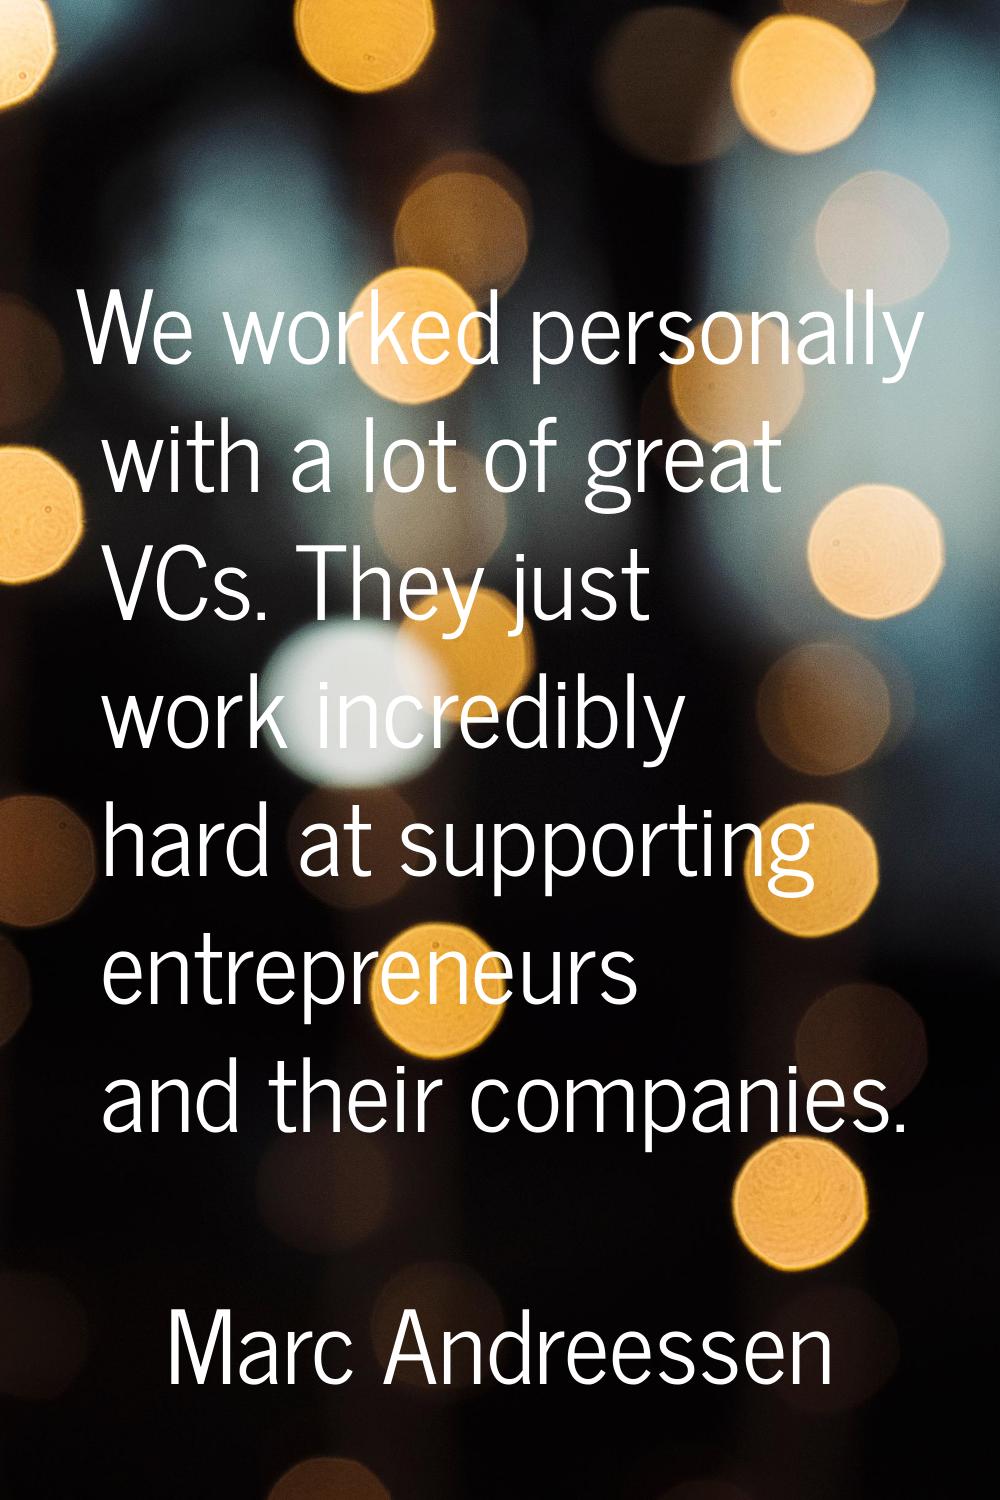 We worked personally with a lot of great VCs. They just work incredibly hard at supporting entrepre